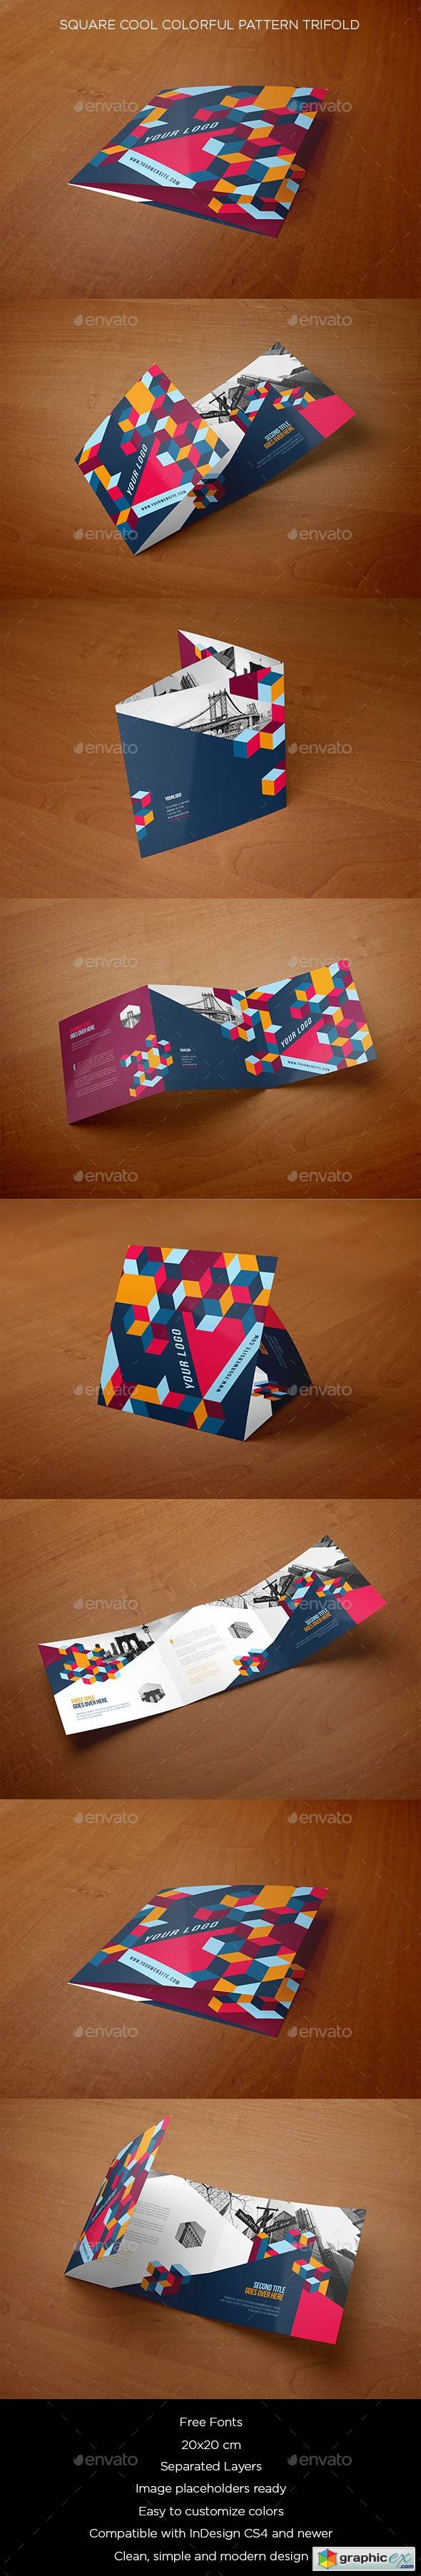 Square Cool Colorful Pattern Trifold